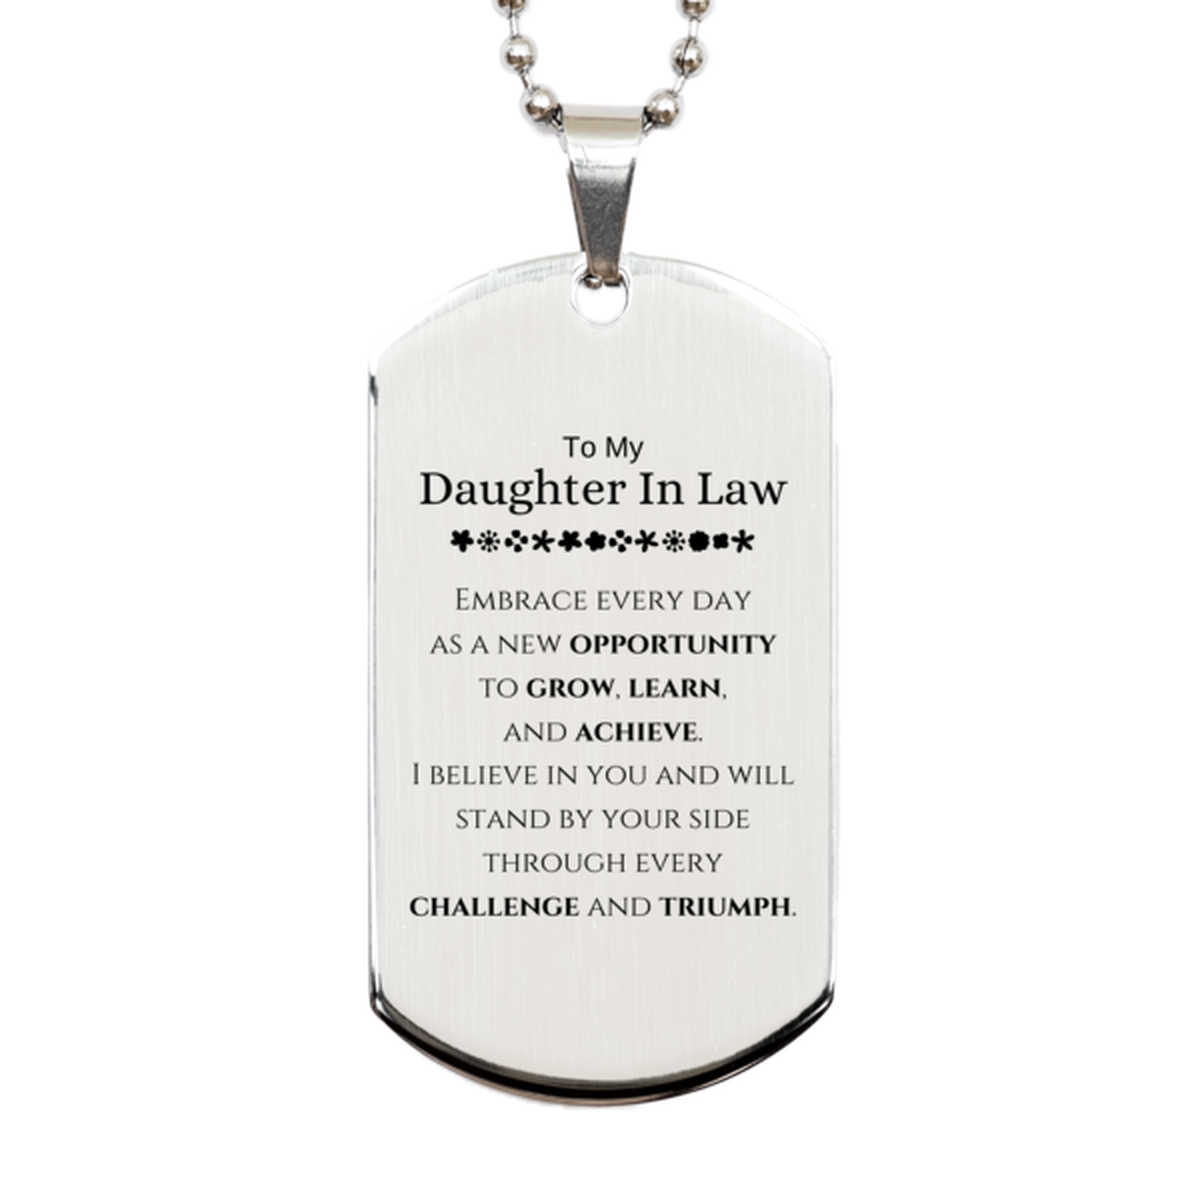 To My Daughter In Law Gifts, I believe in you and will stand by your side, Inspirational Silver Dog Tag For Daughter In Law, Birthday Christmas Motivational Daughter In Law Gifts